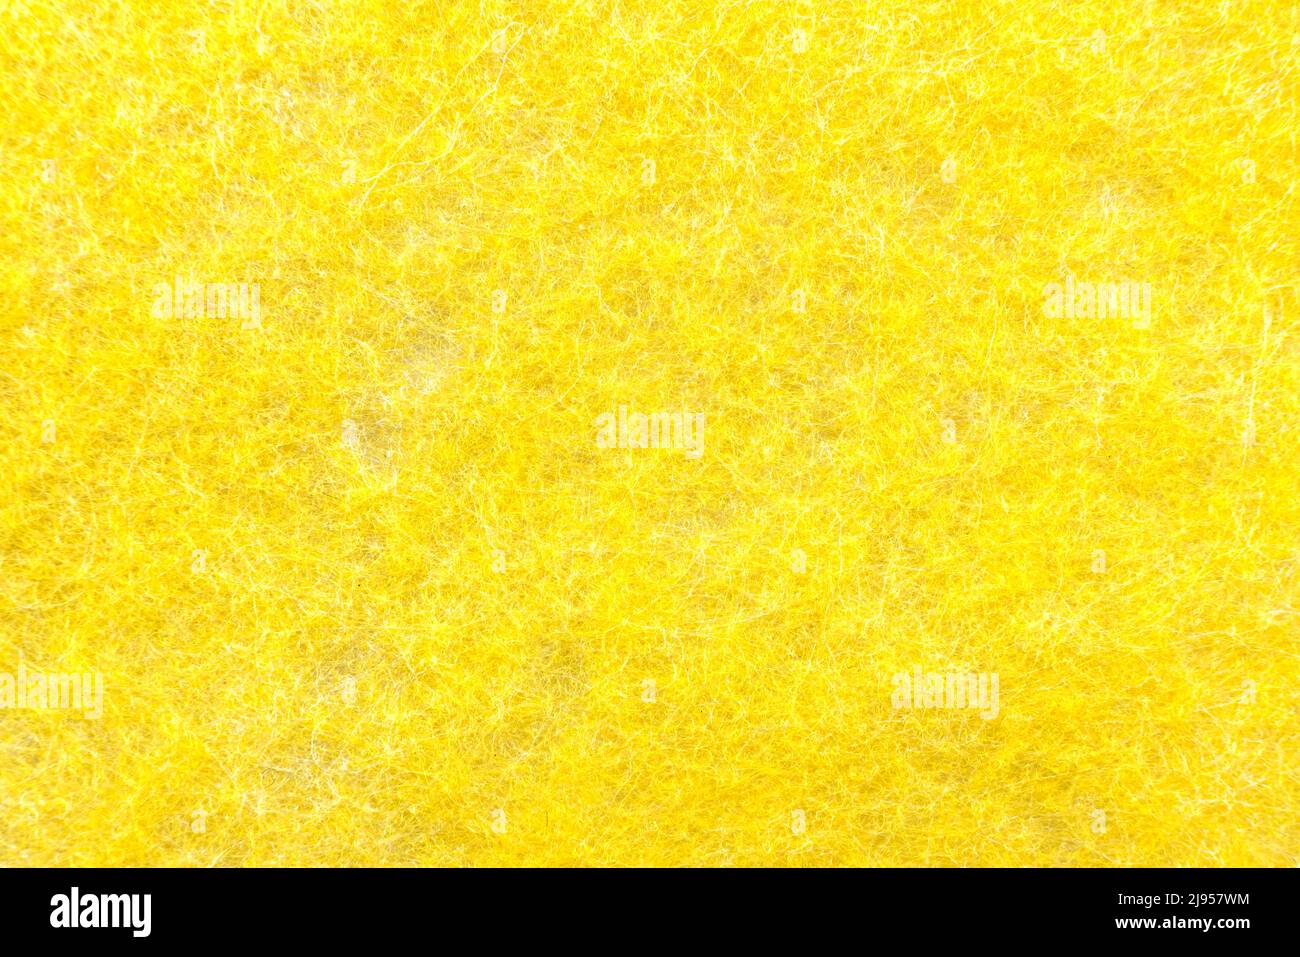 Background of water-absorbent fabric. Water absorption material. Sponge Stock Photo